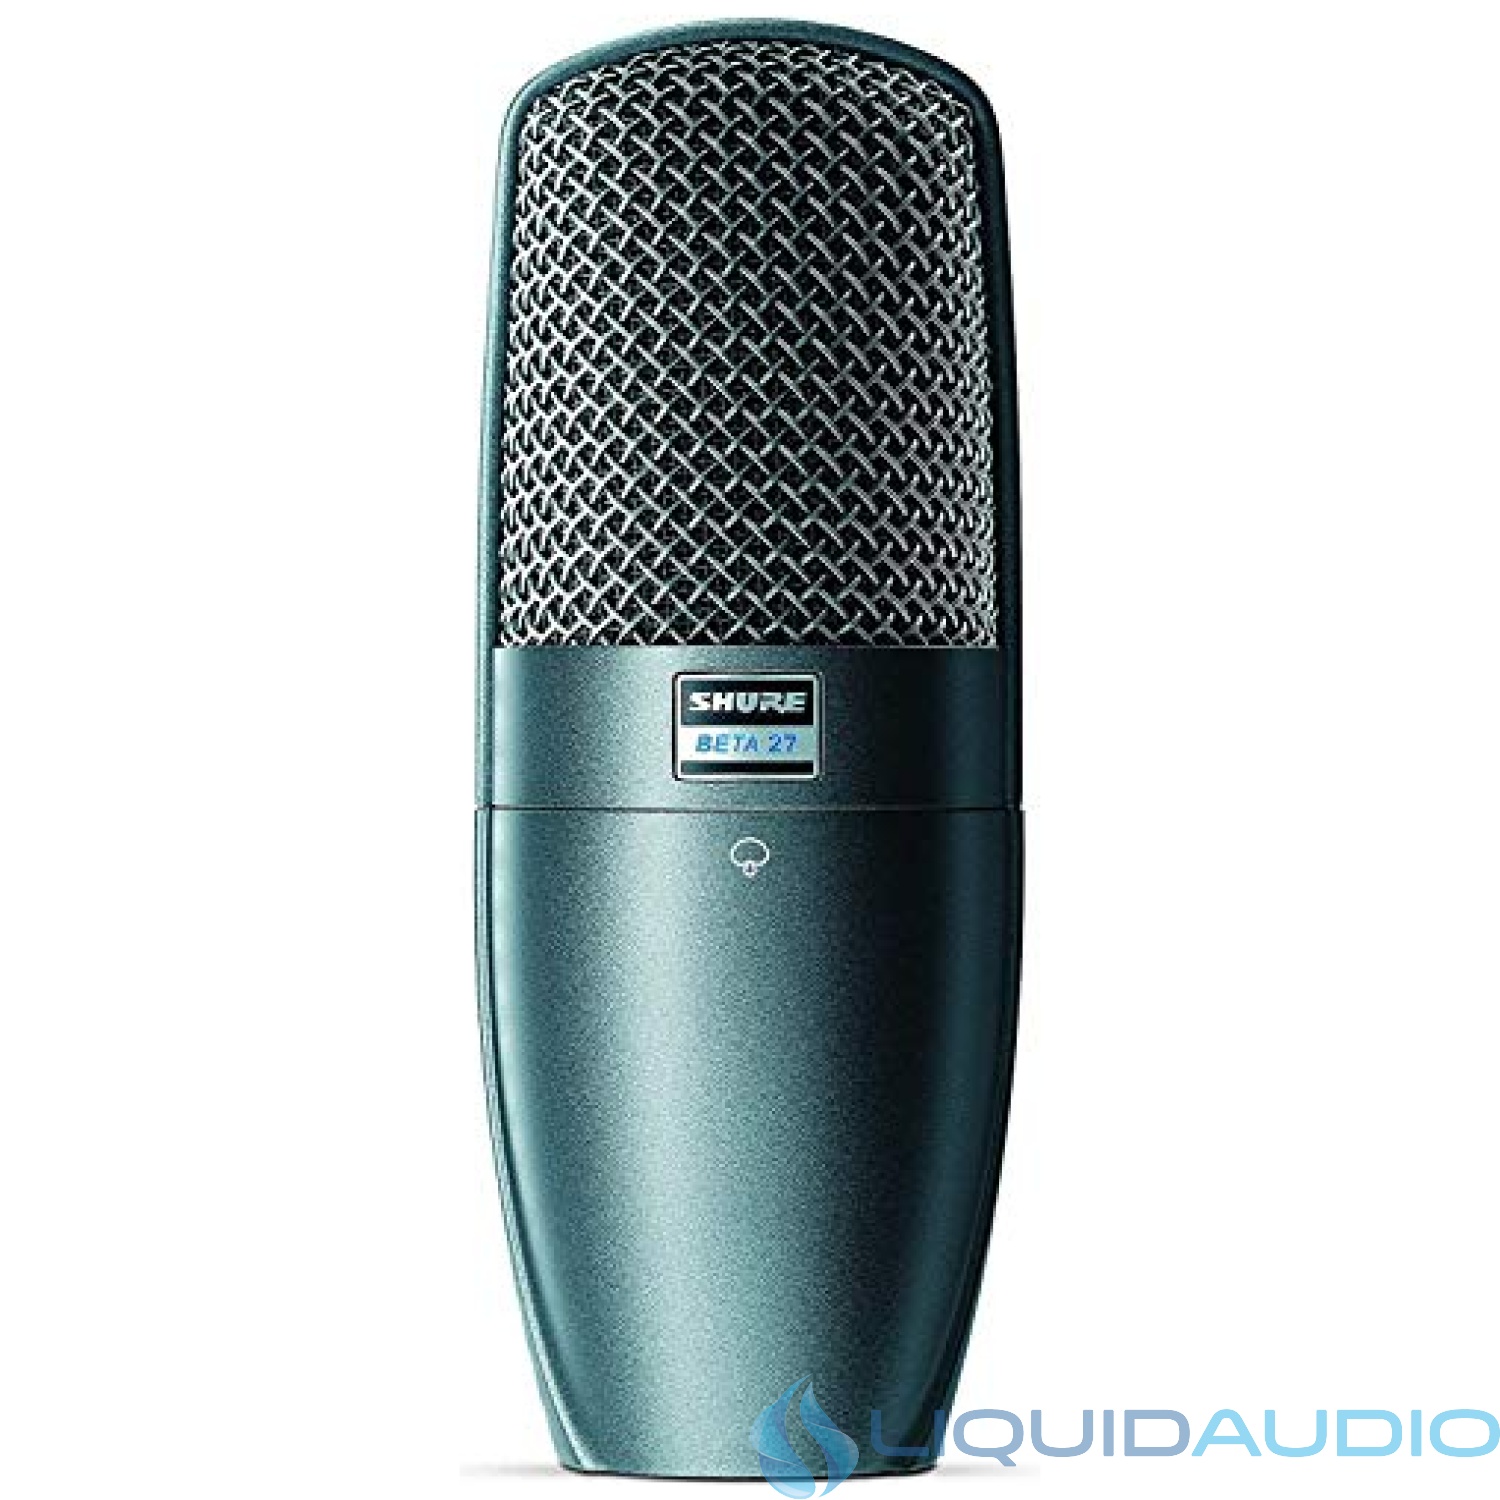 Shure BETA 27 Supercardioid Side-Address Condenser Microphone for Instrument and Vocal Applications